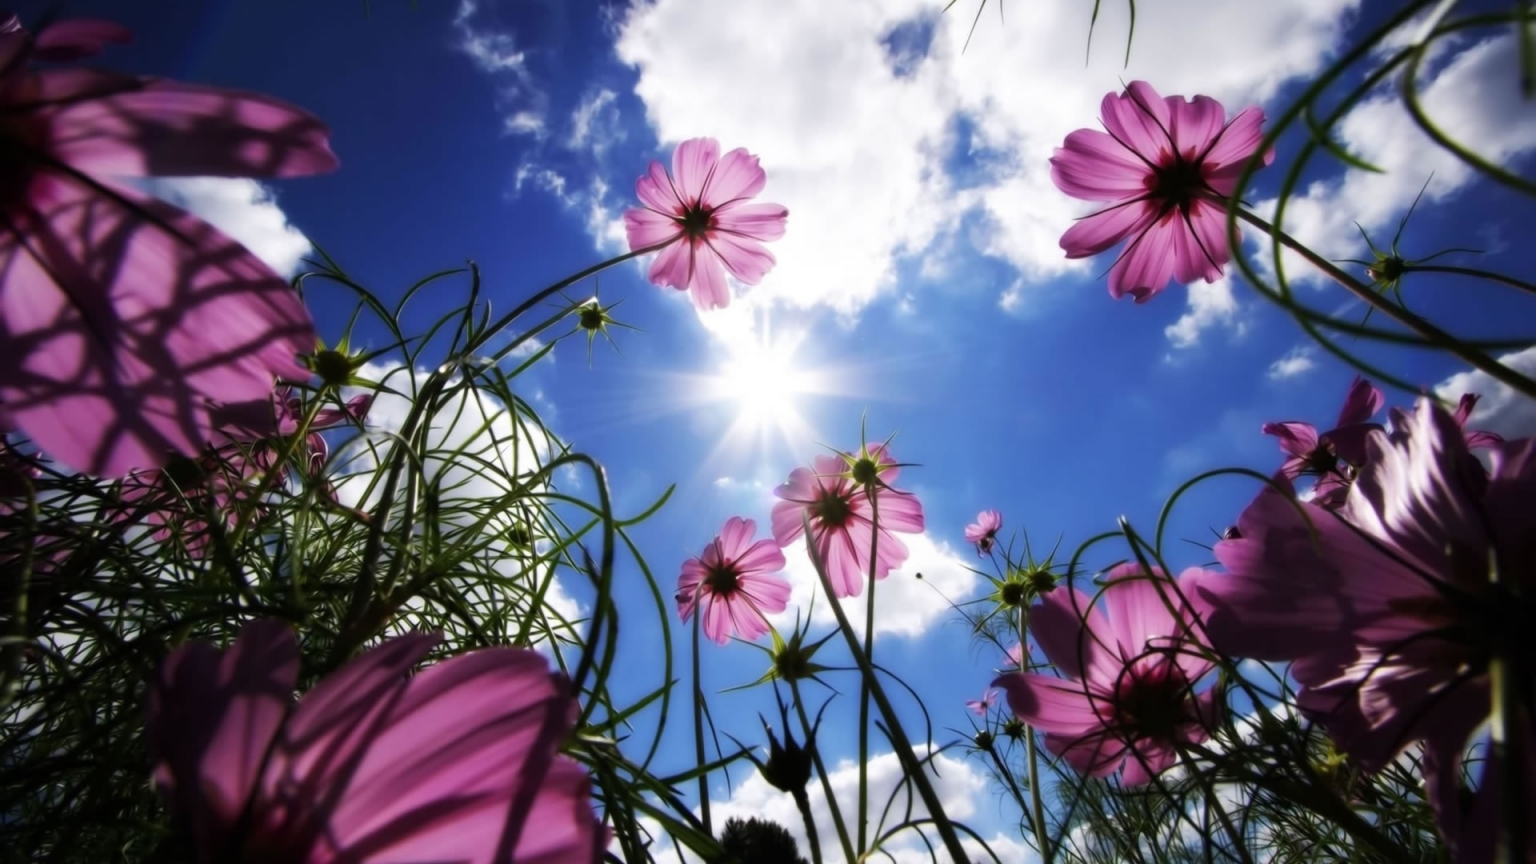 Flowers under the sun for 1536 x 864 HDTV resolution